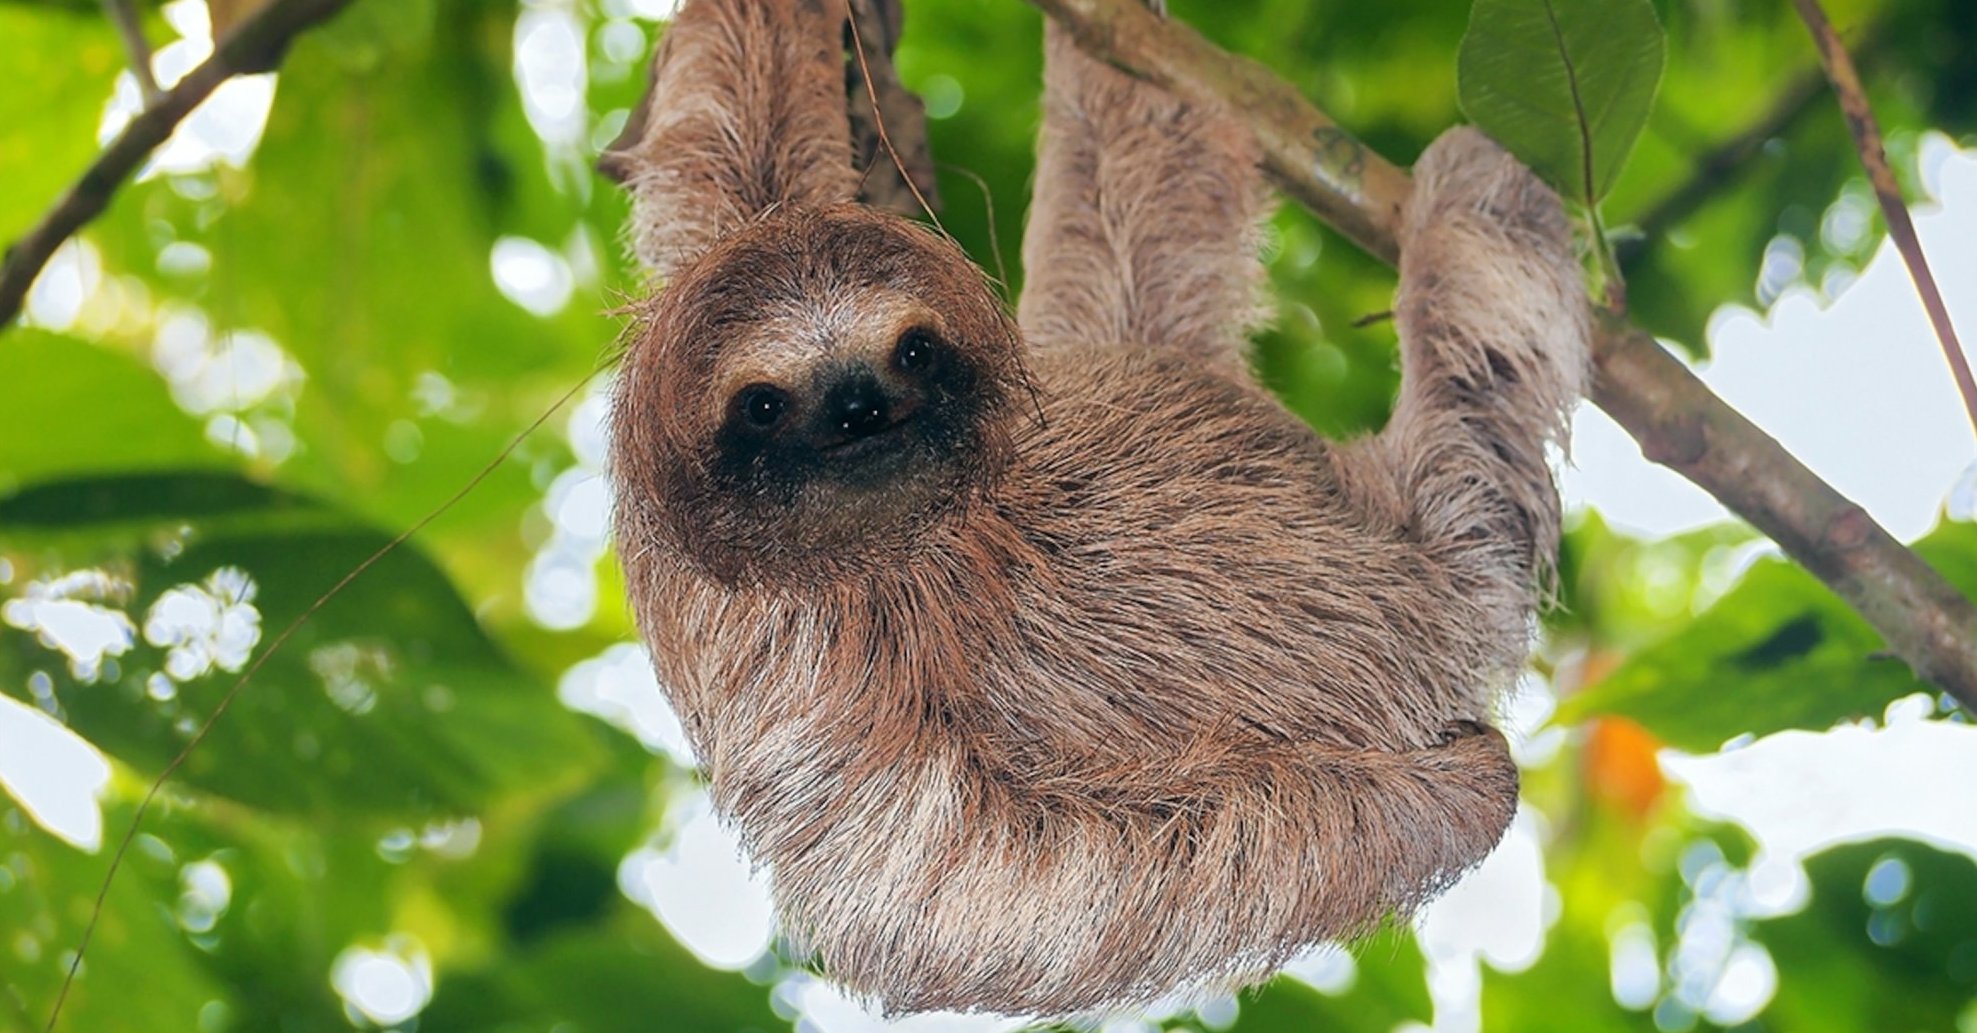 The hard life of a sloth